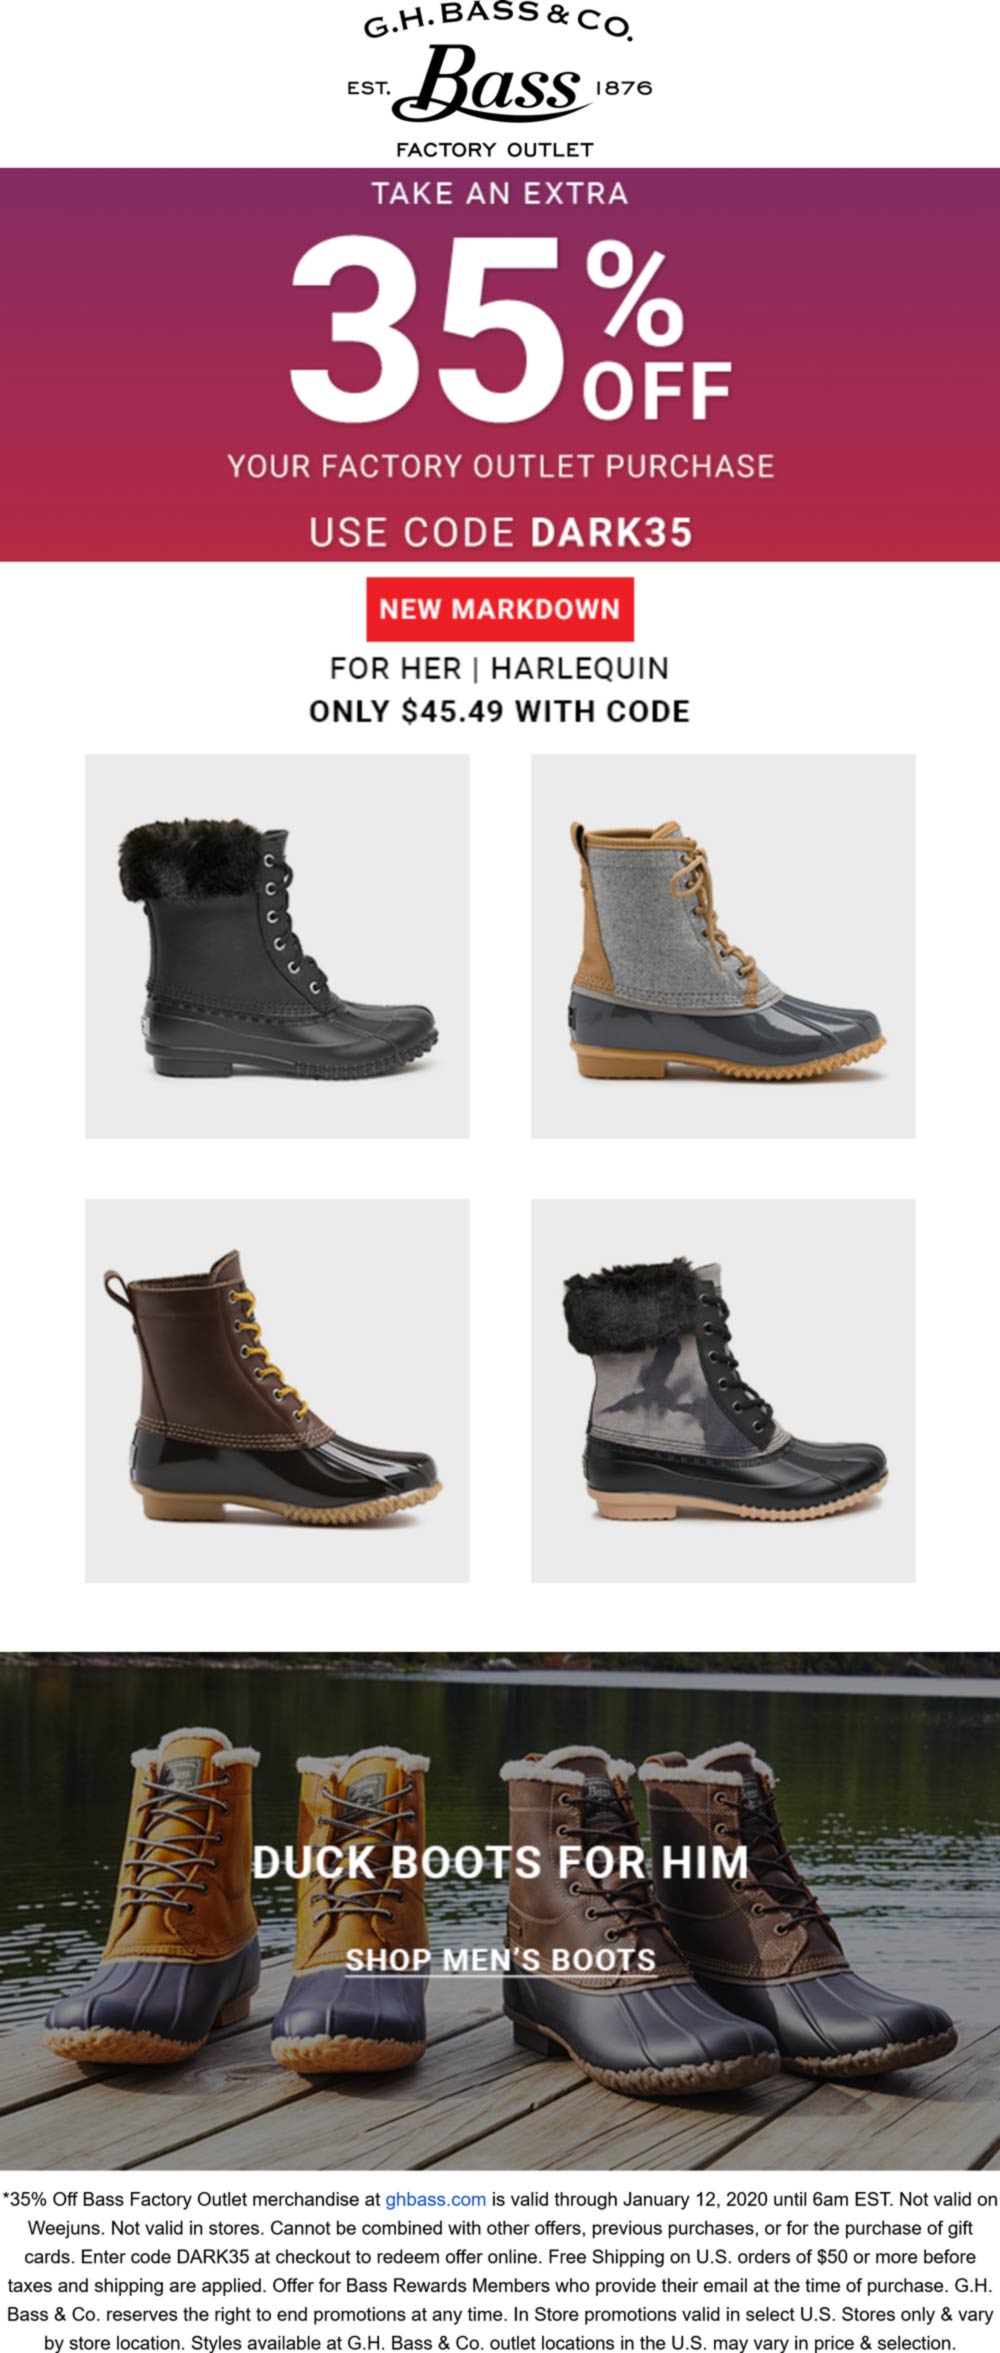 G.H. Bass & Co. Factory Outlet stores Coupon  Extra 35% off today at G.H. Bass & Co. Factory Outlet via promo code DARK35 #ghbasscofactoryoutlet 